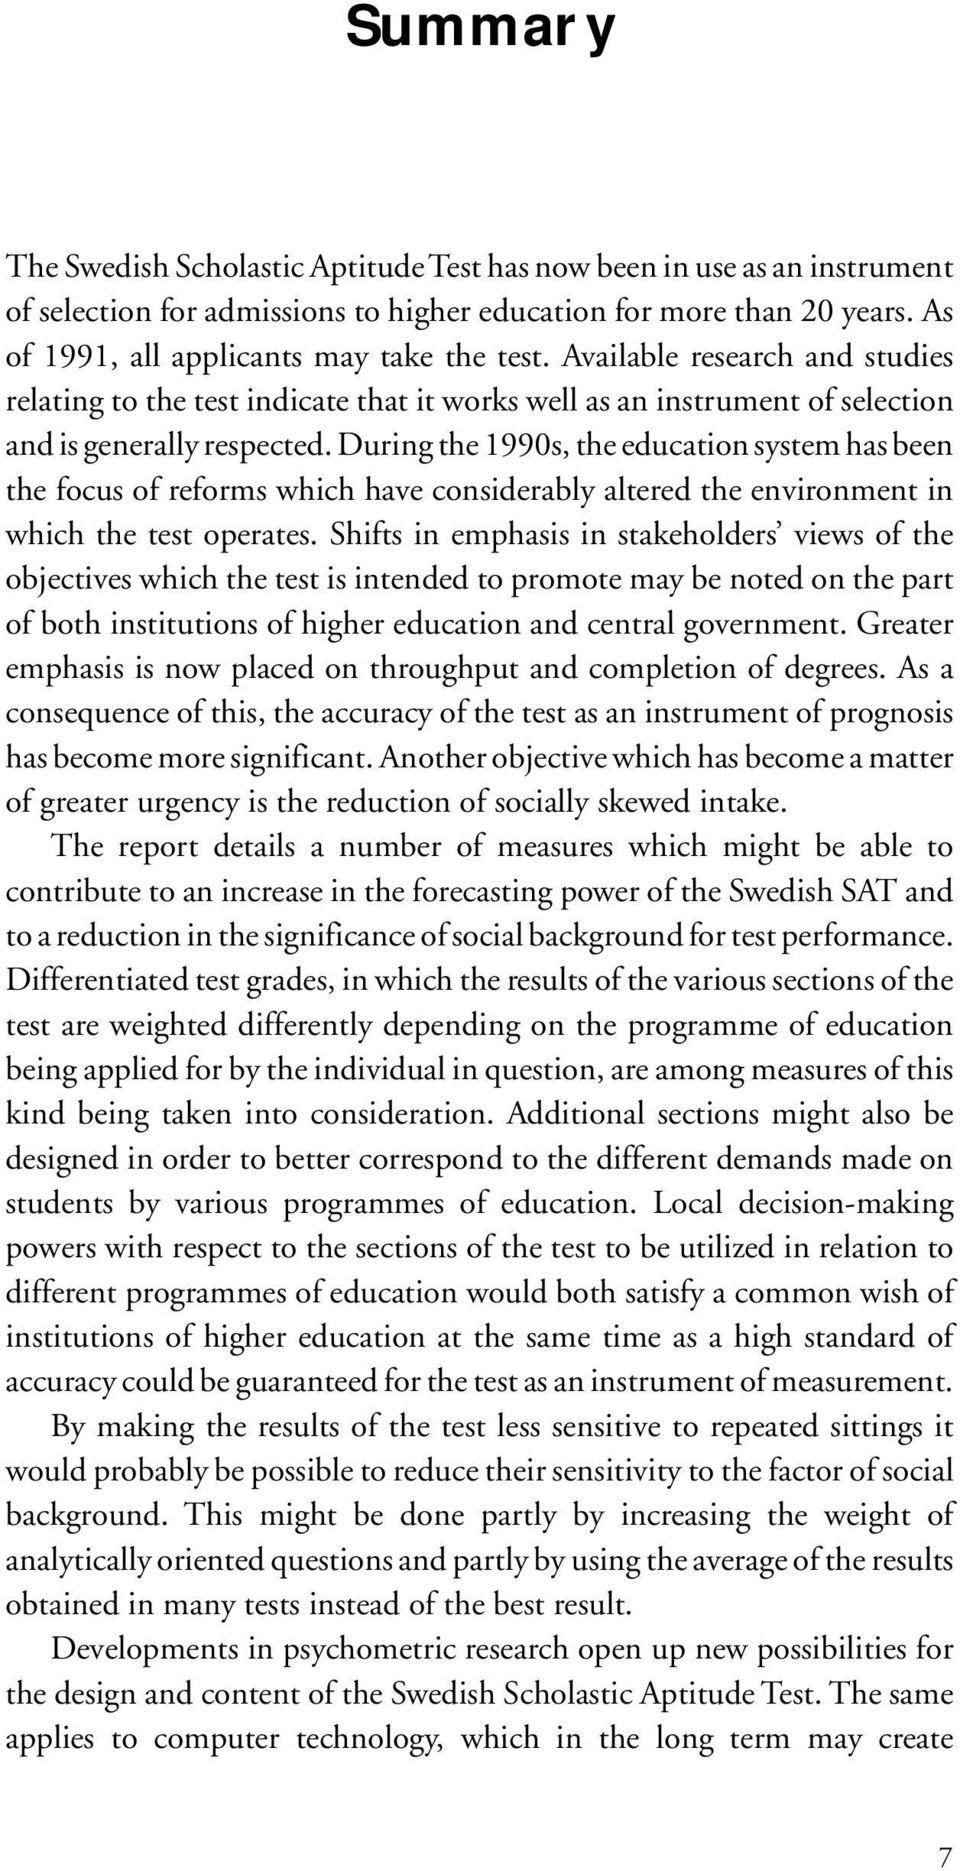 During the 1990s, the education system has been the focus of reforms which have considerably altered the environment in which the test operates.